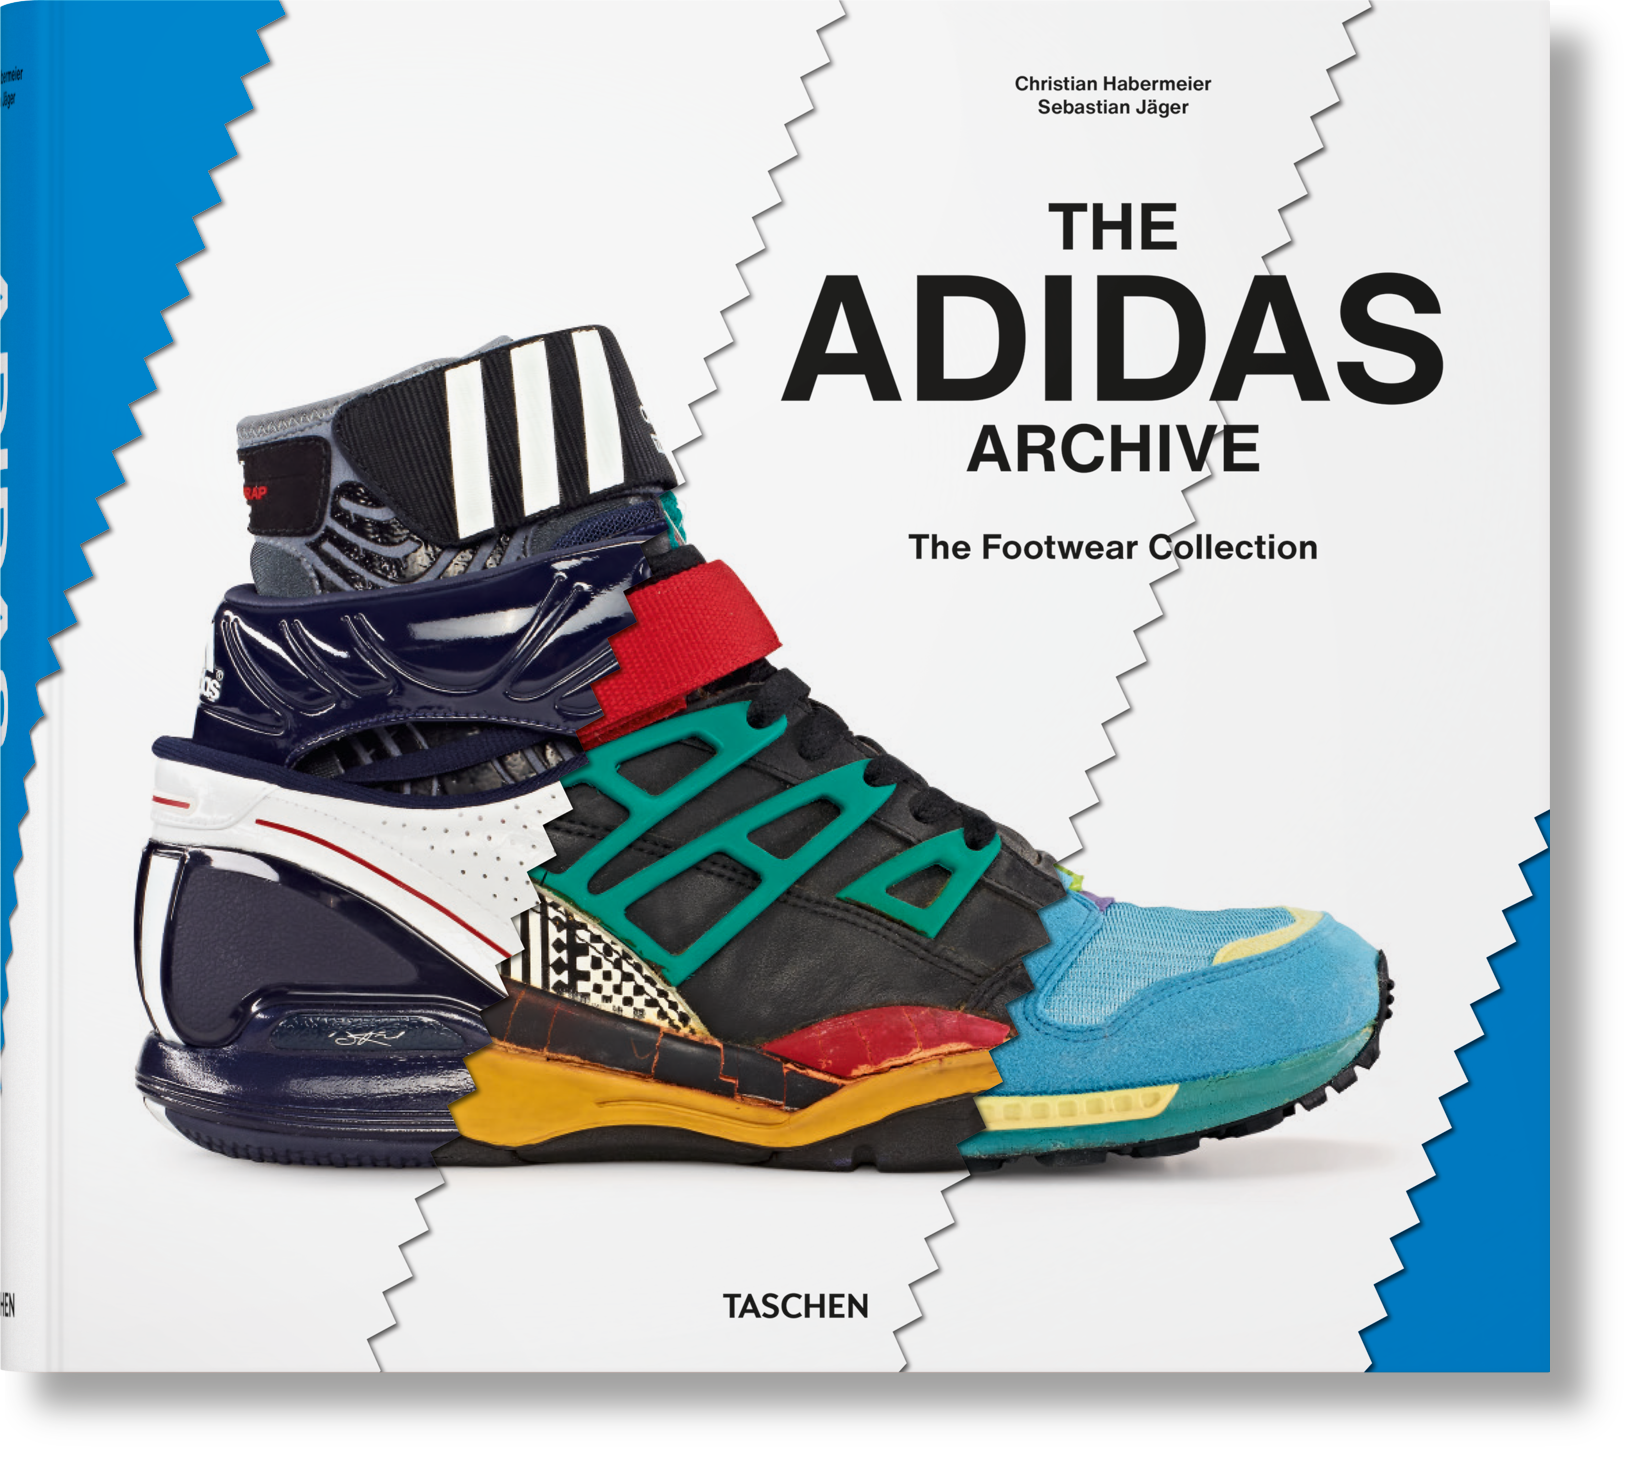 TASCHEN The adidas Archive. The Footwear Collection